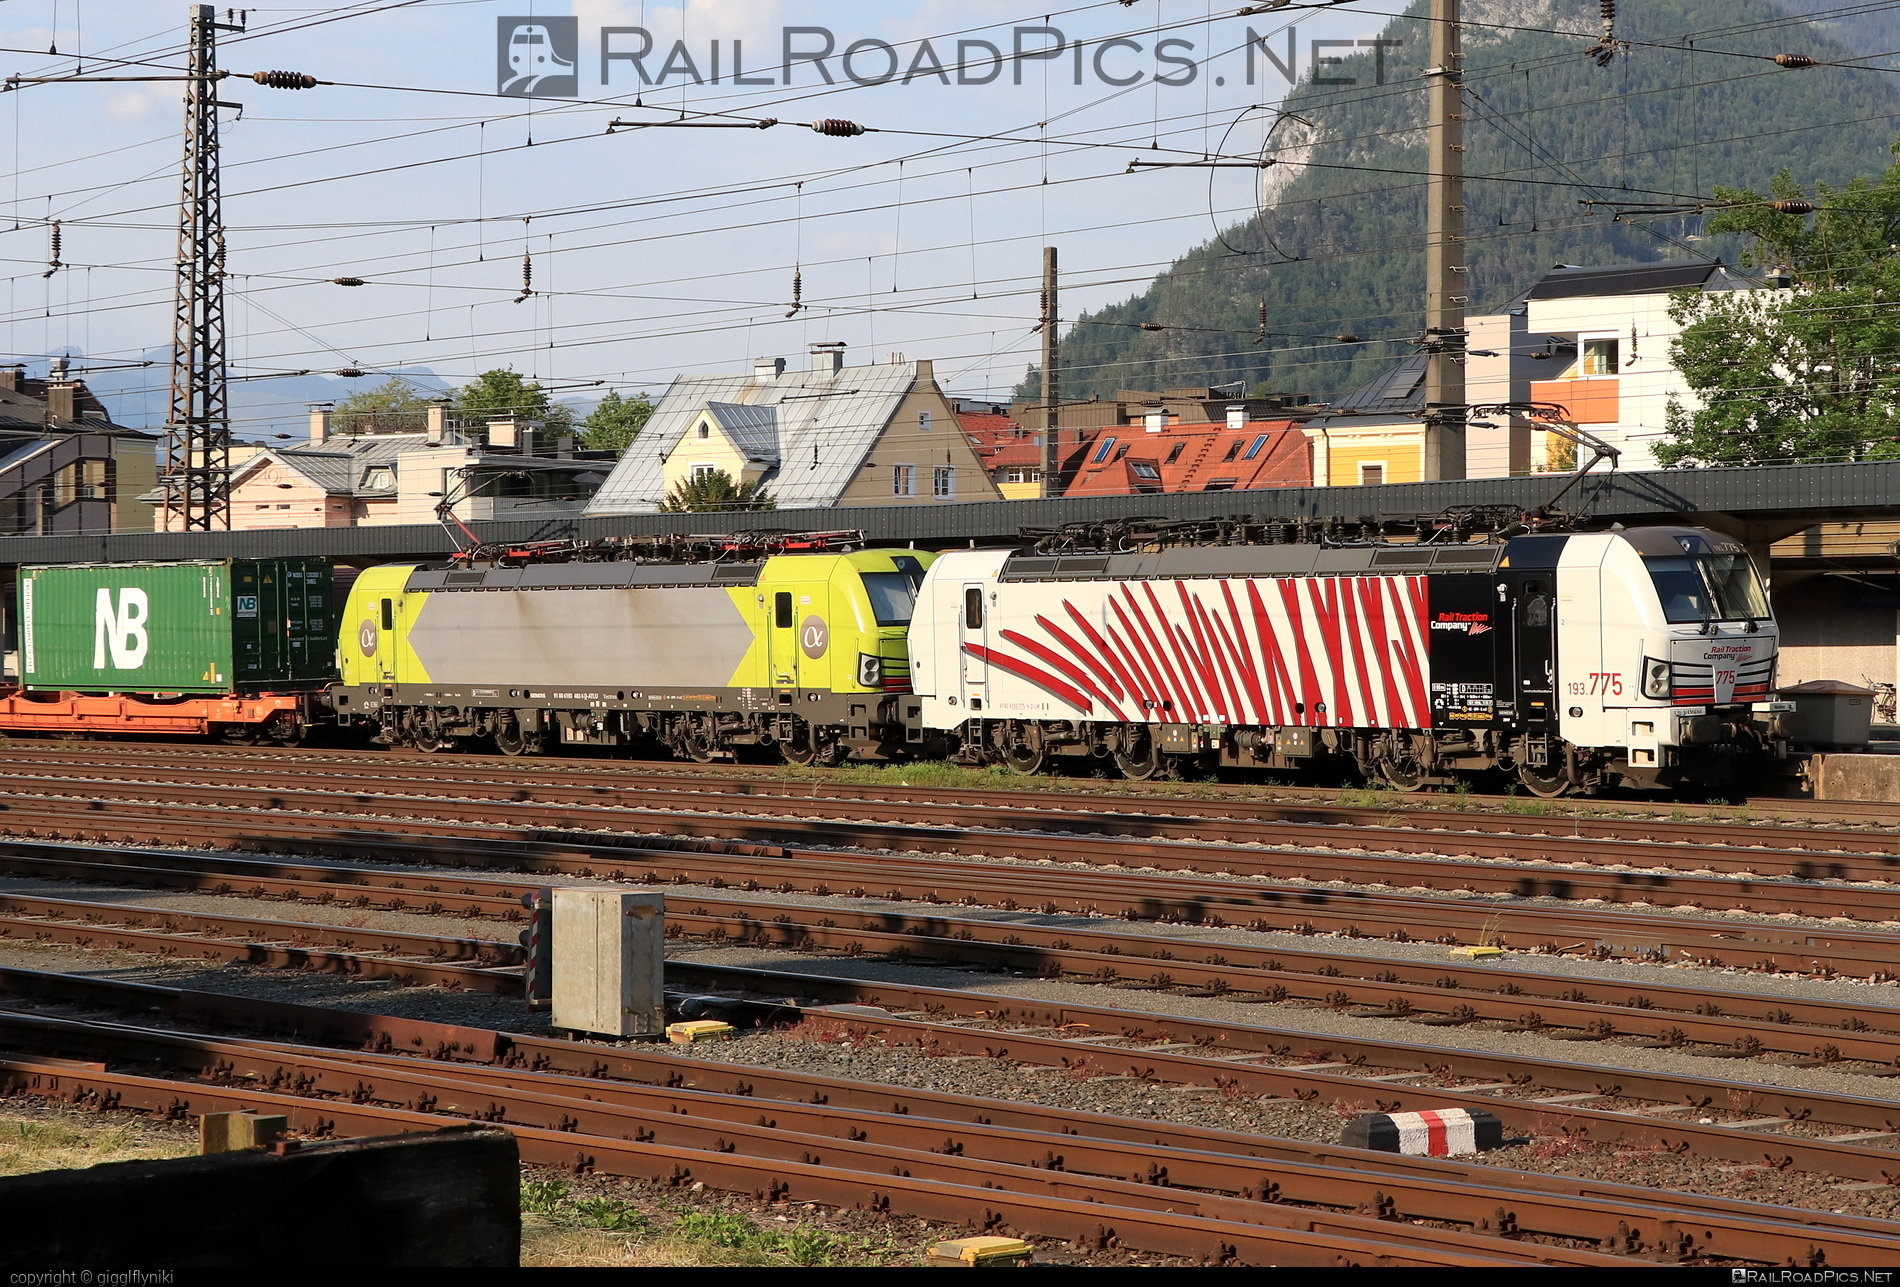 Siemens Vectron MS - 193 775 operated by Rail Traction Company #LokomotionGesellschaftFurSchienentraktion #RailTractionCompany #container #flatwagon #lokomotion #rtc #siemens #siemensVectron #siemensVectronMS #vectron #vectronMS